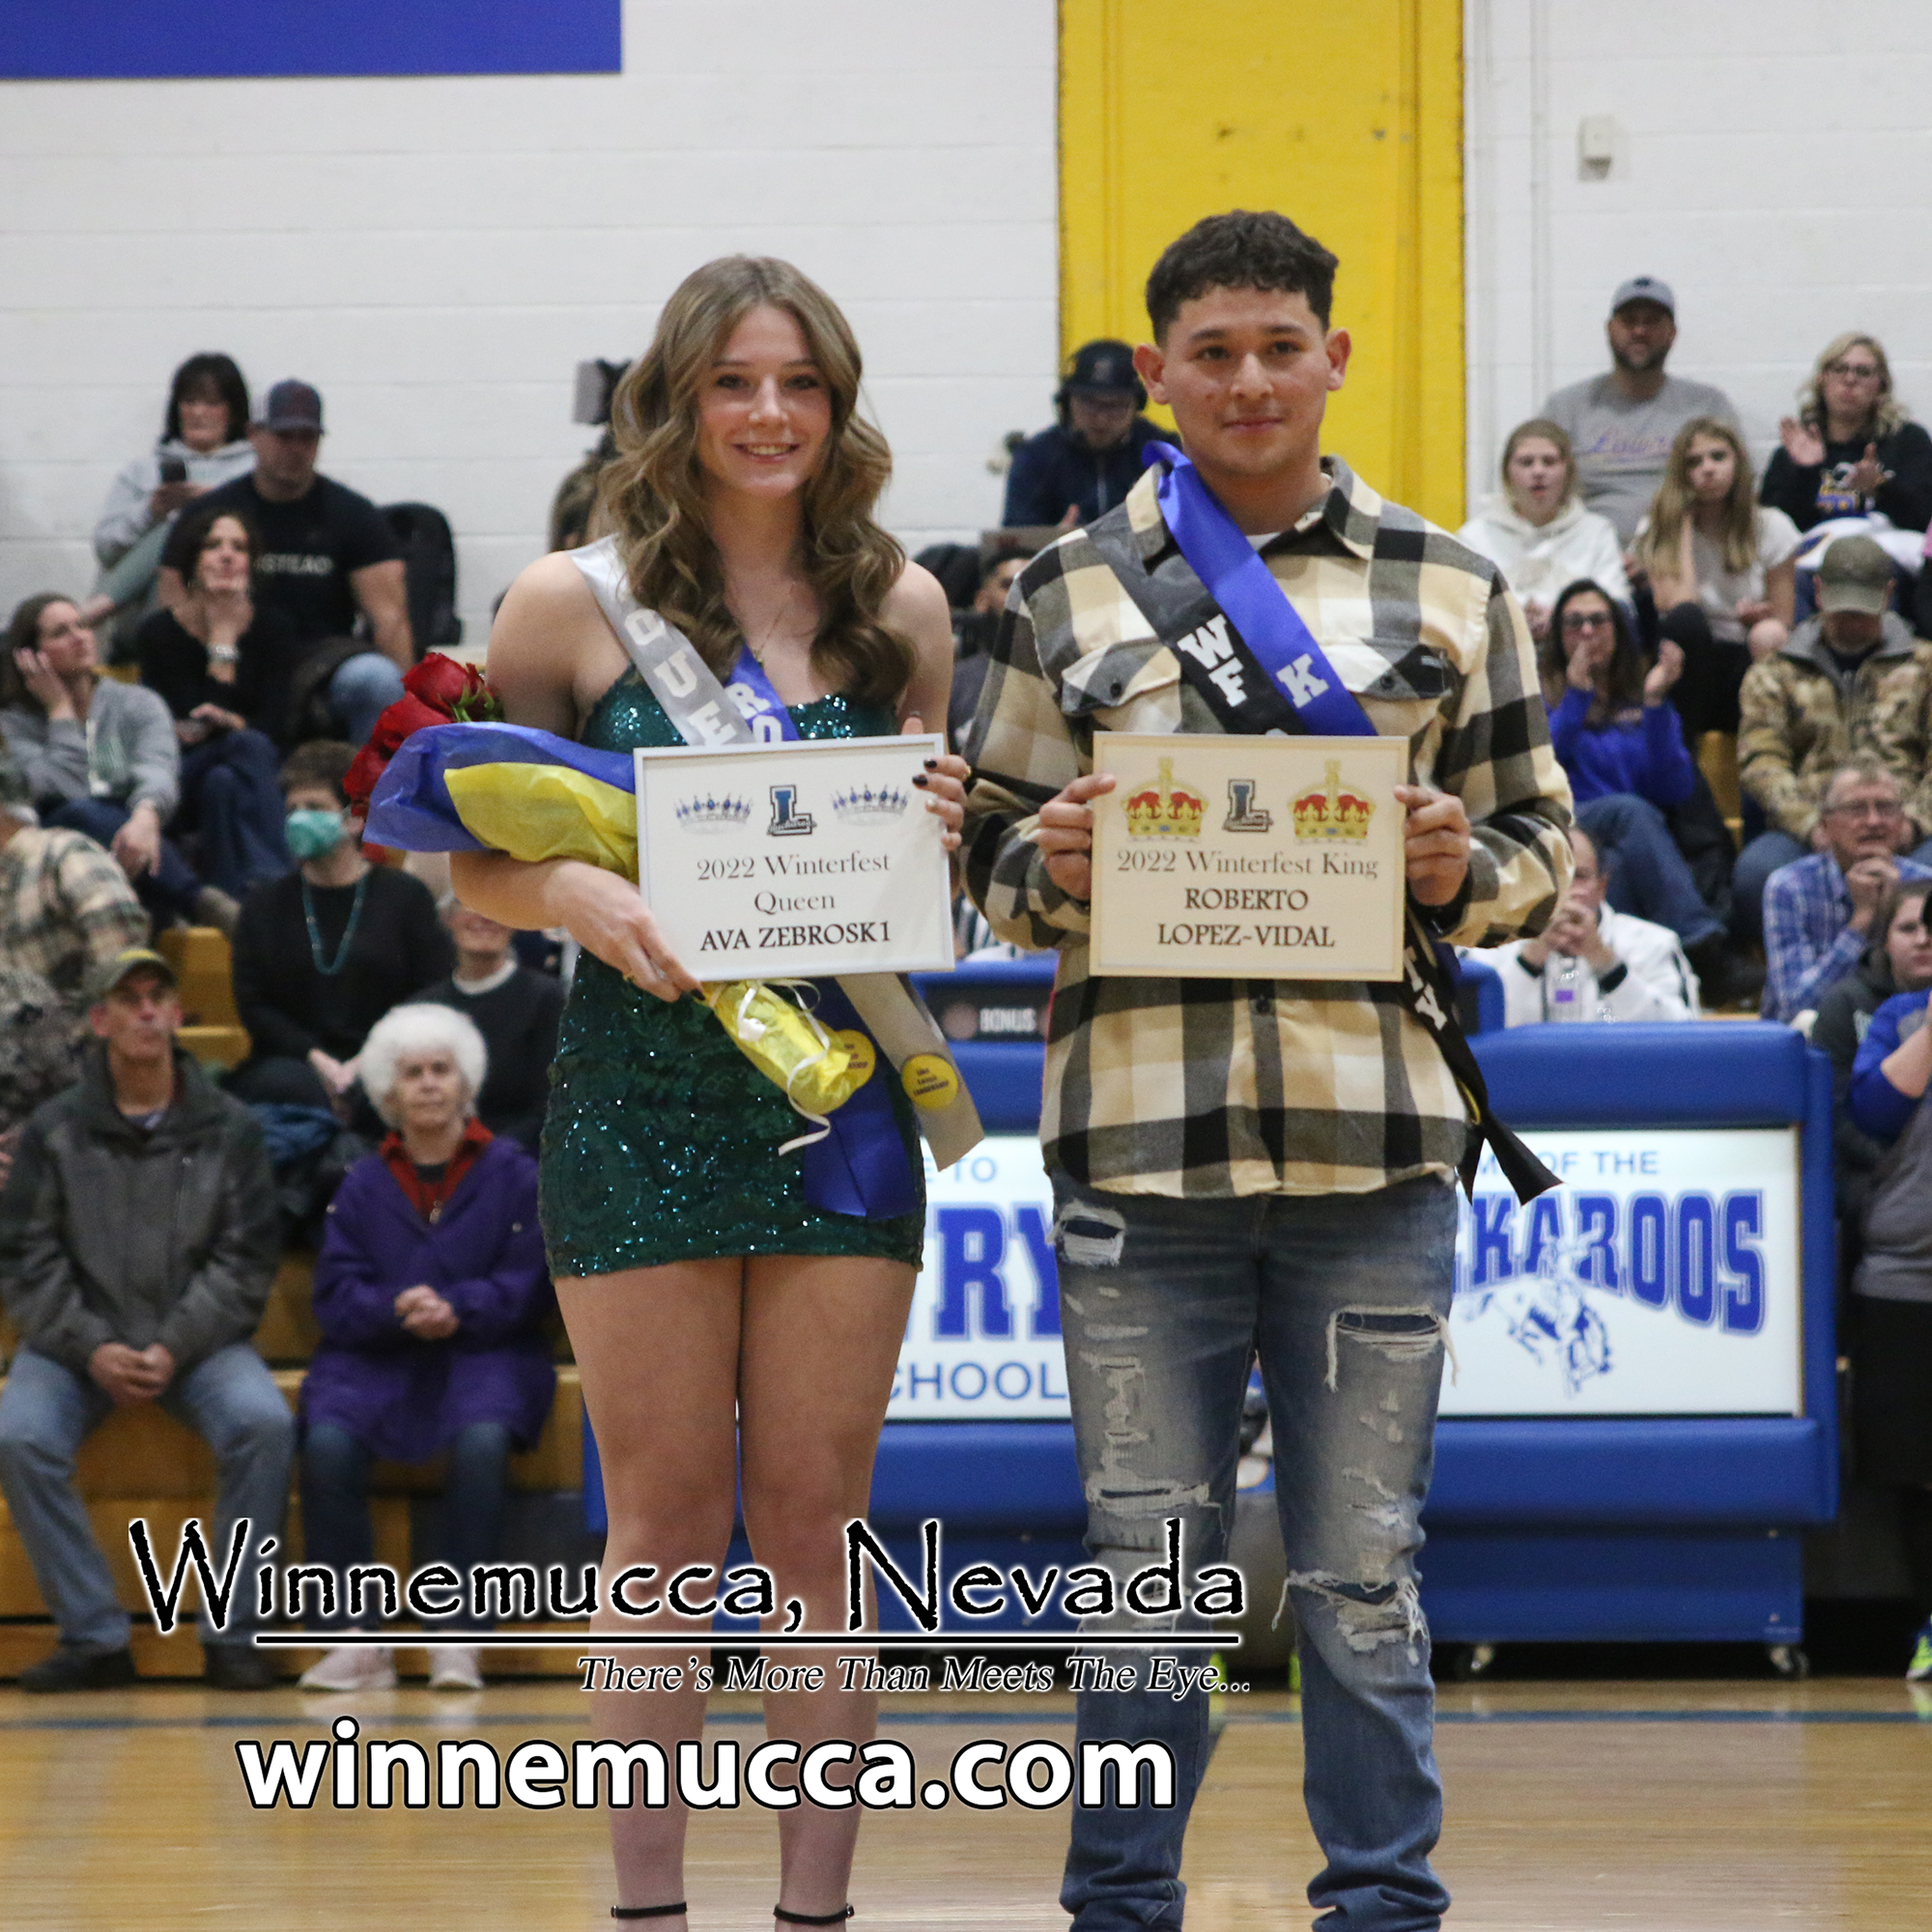 Ava Zebroski and Roberto Lopez after their win of Winterfest Queen and King./ Hayden Case • The Brand